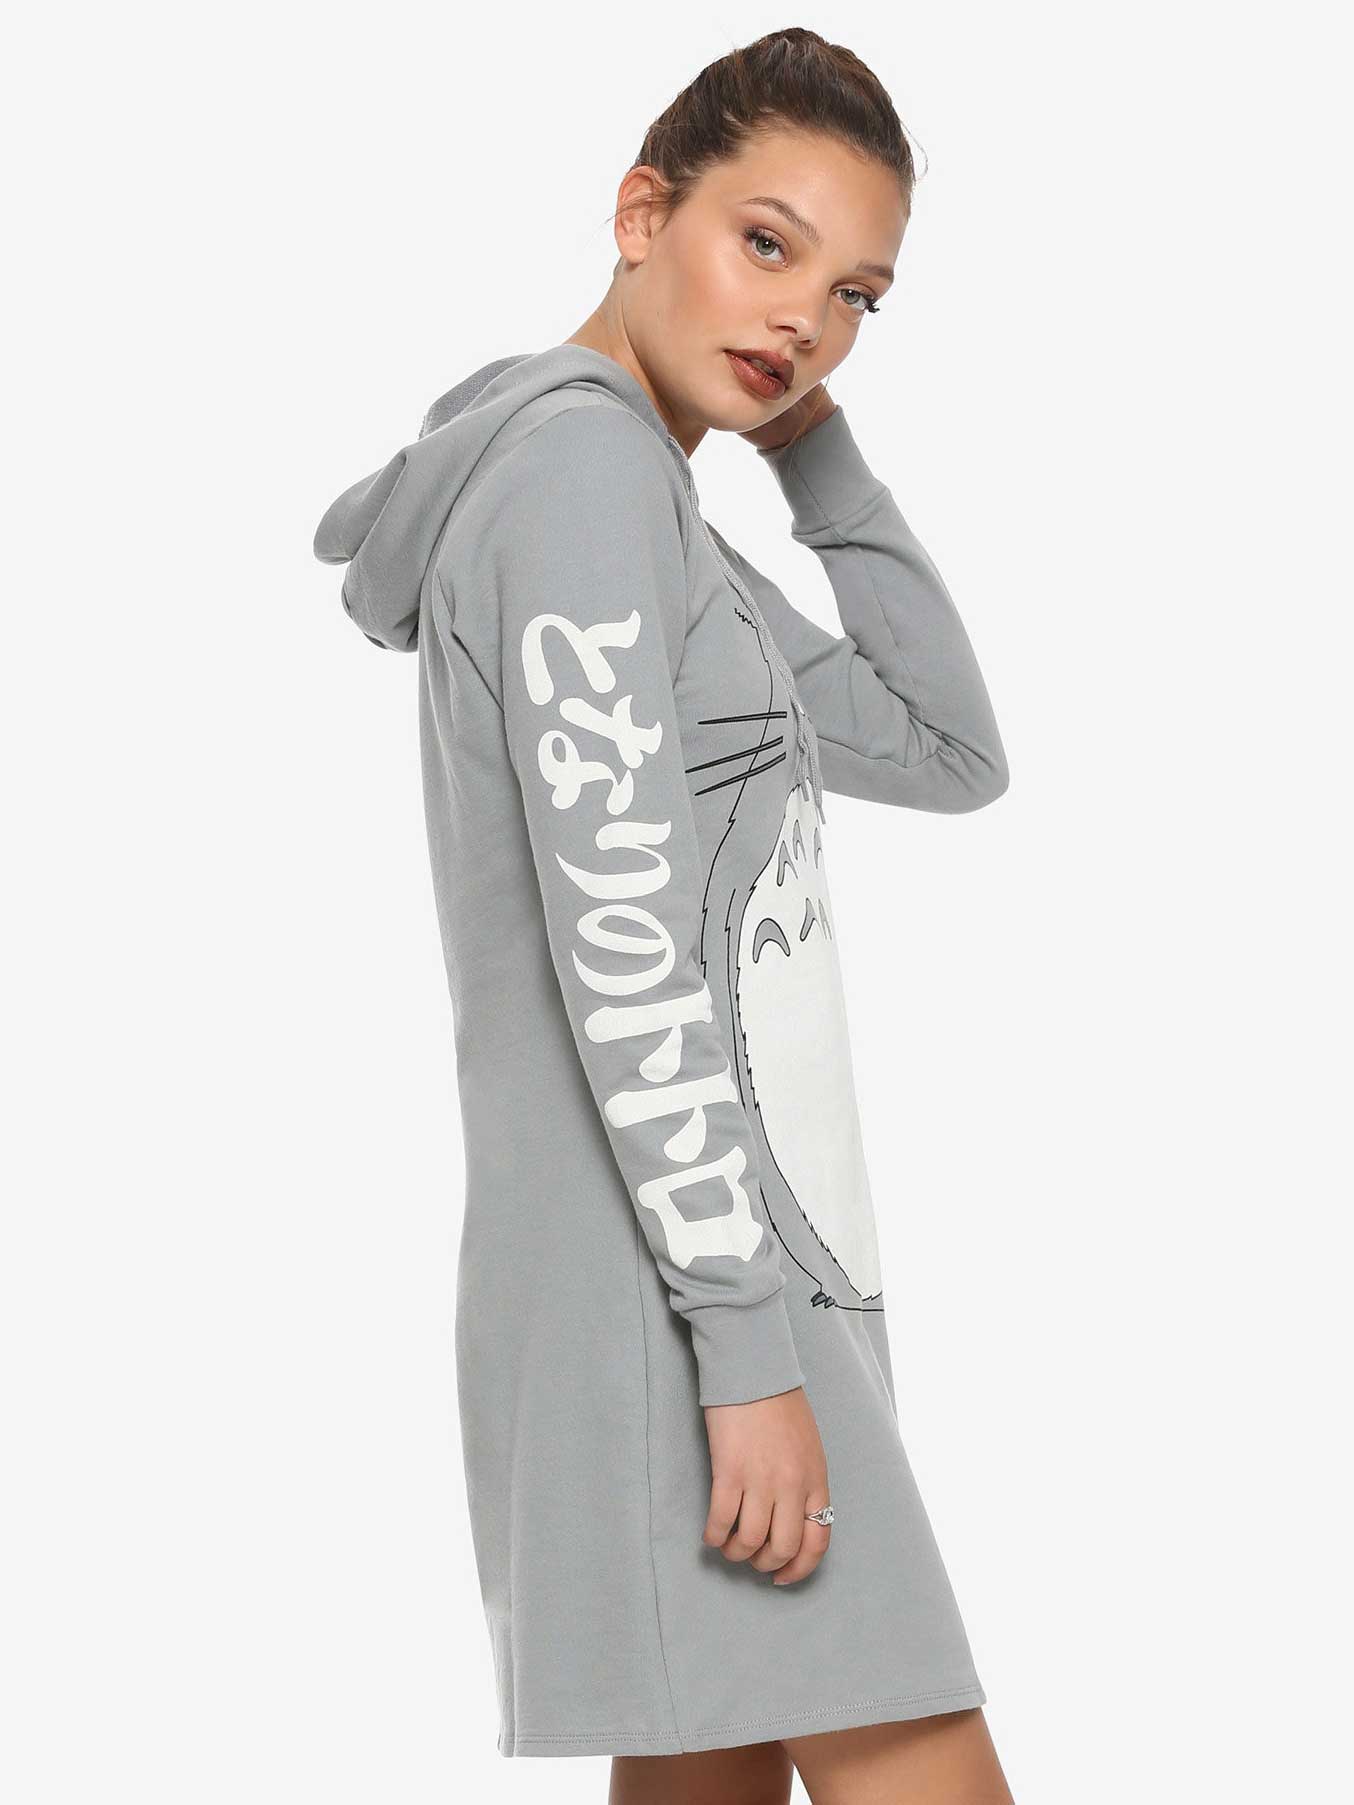 grey hoodie one piece dress with cat graphic